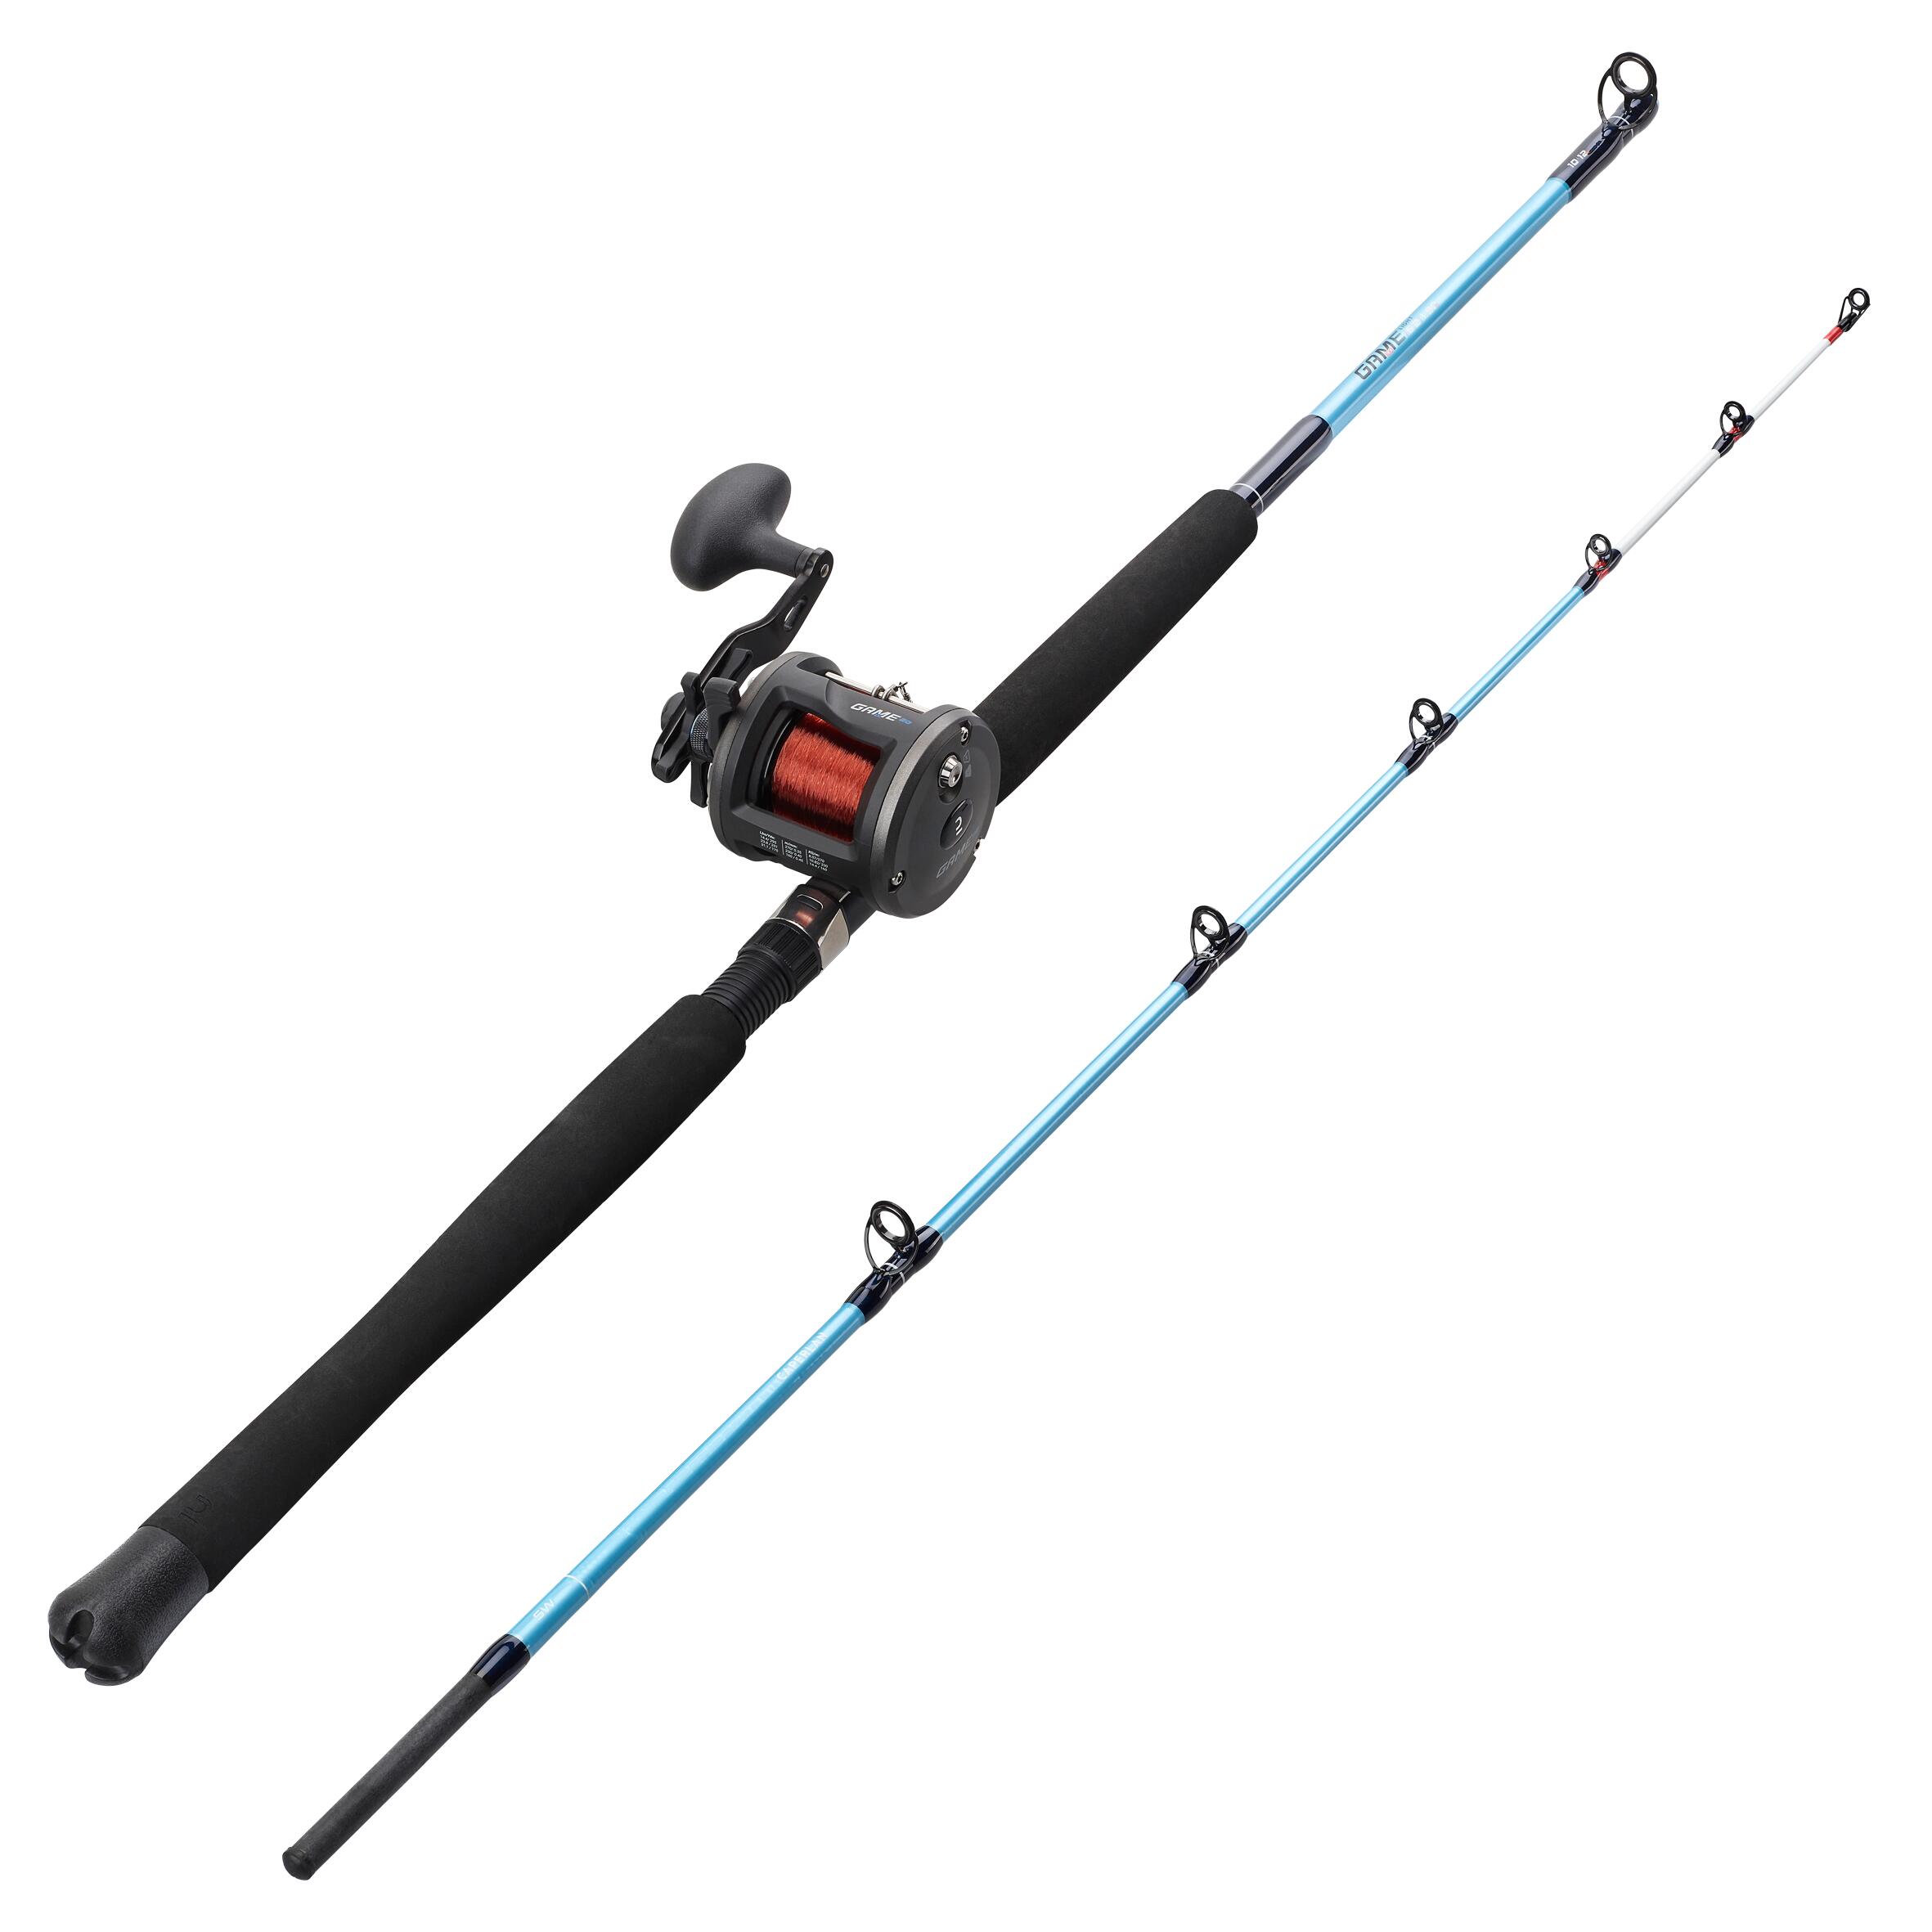 CAPERLAN Trailing and sea fishing combo, COMBO GAME-100 190 10/12 LBS